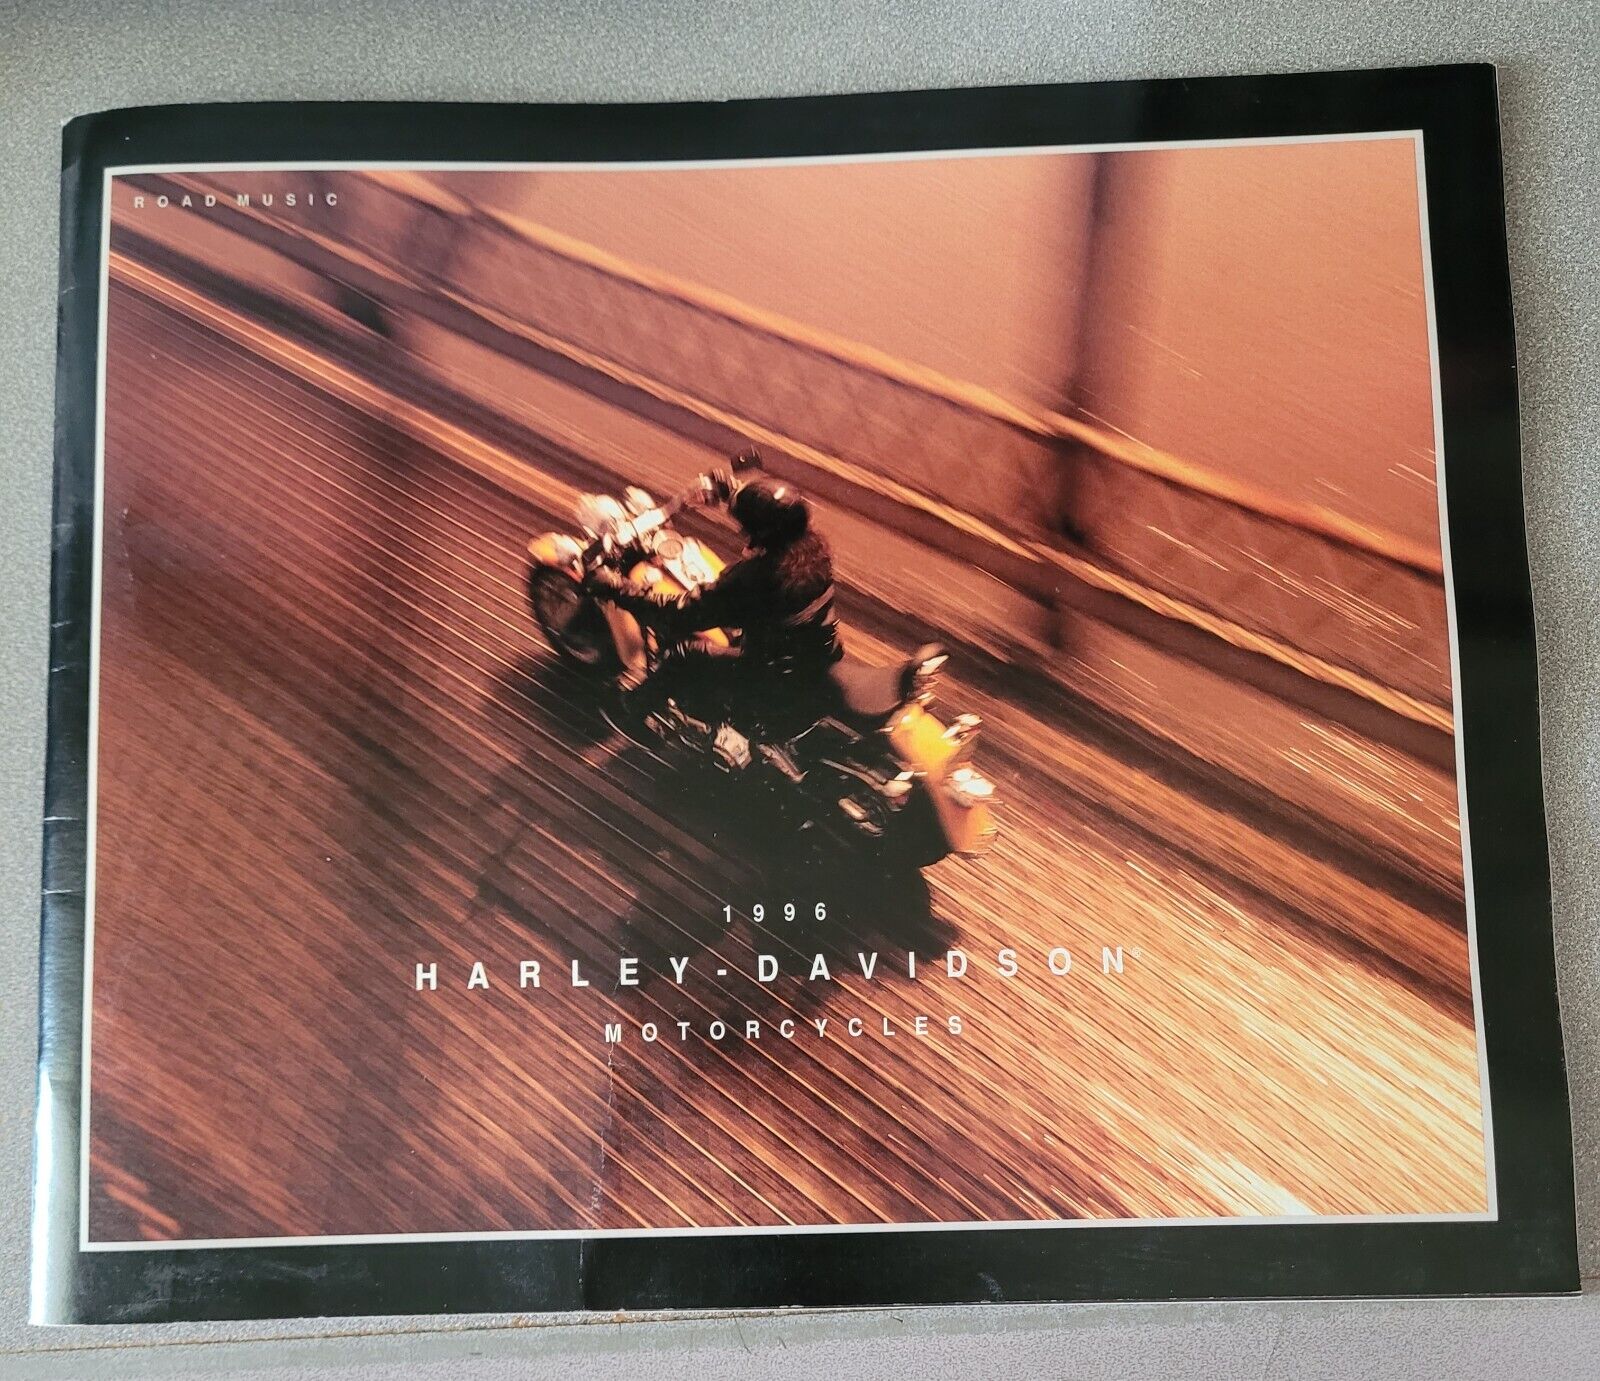 Harley Davidson 1996 Model Year Motorcycle Sales Brochure With 33 RPM Record